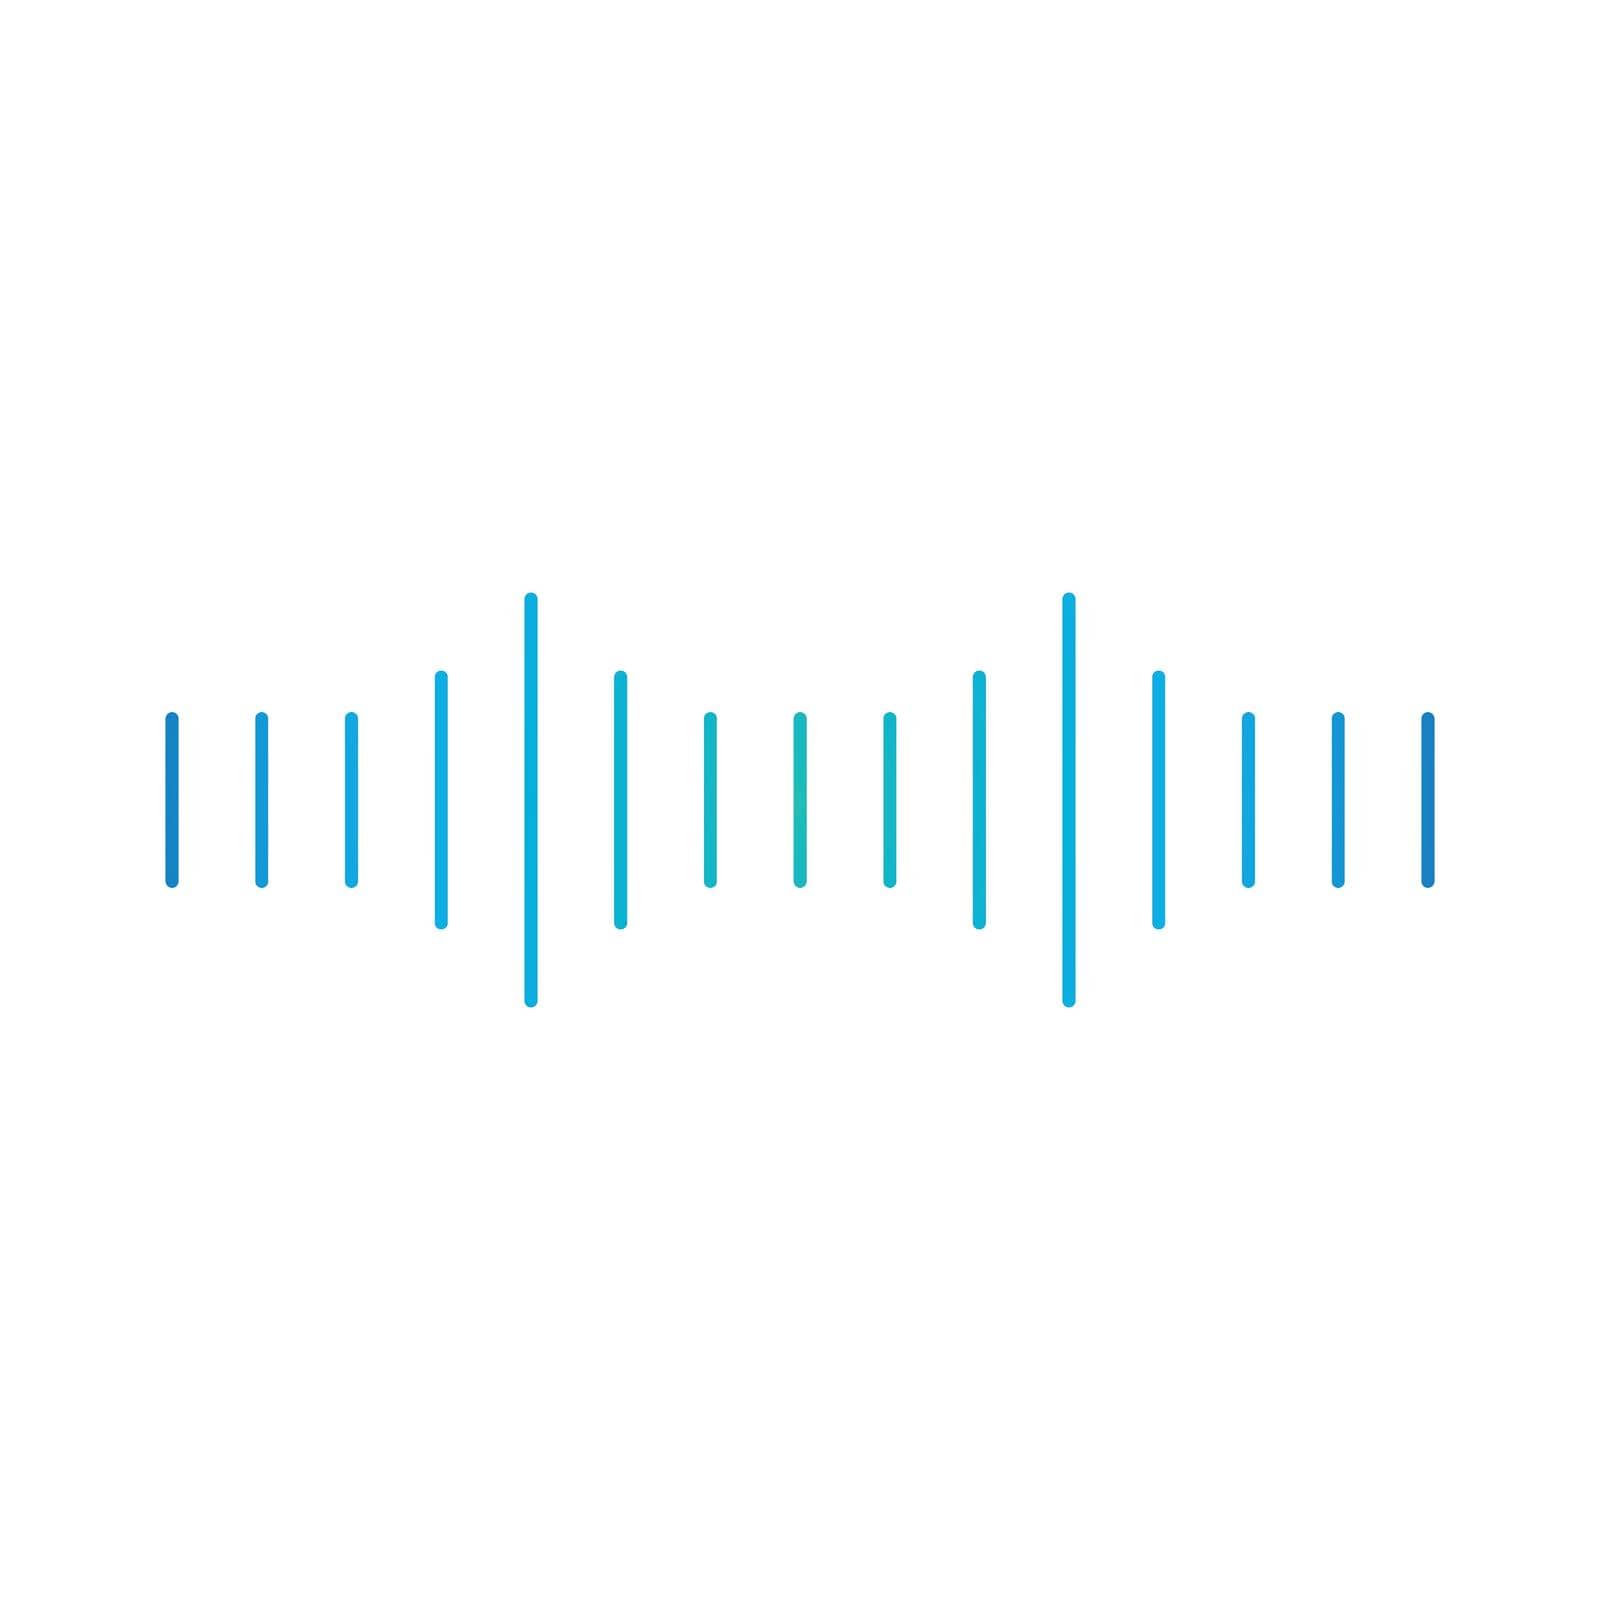 Linear sound or voice floating media wave, soundwave icon. Minimalistic design. Vector illustration isolated on white